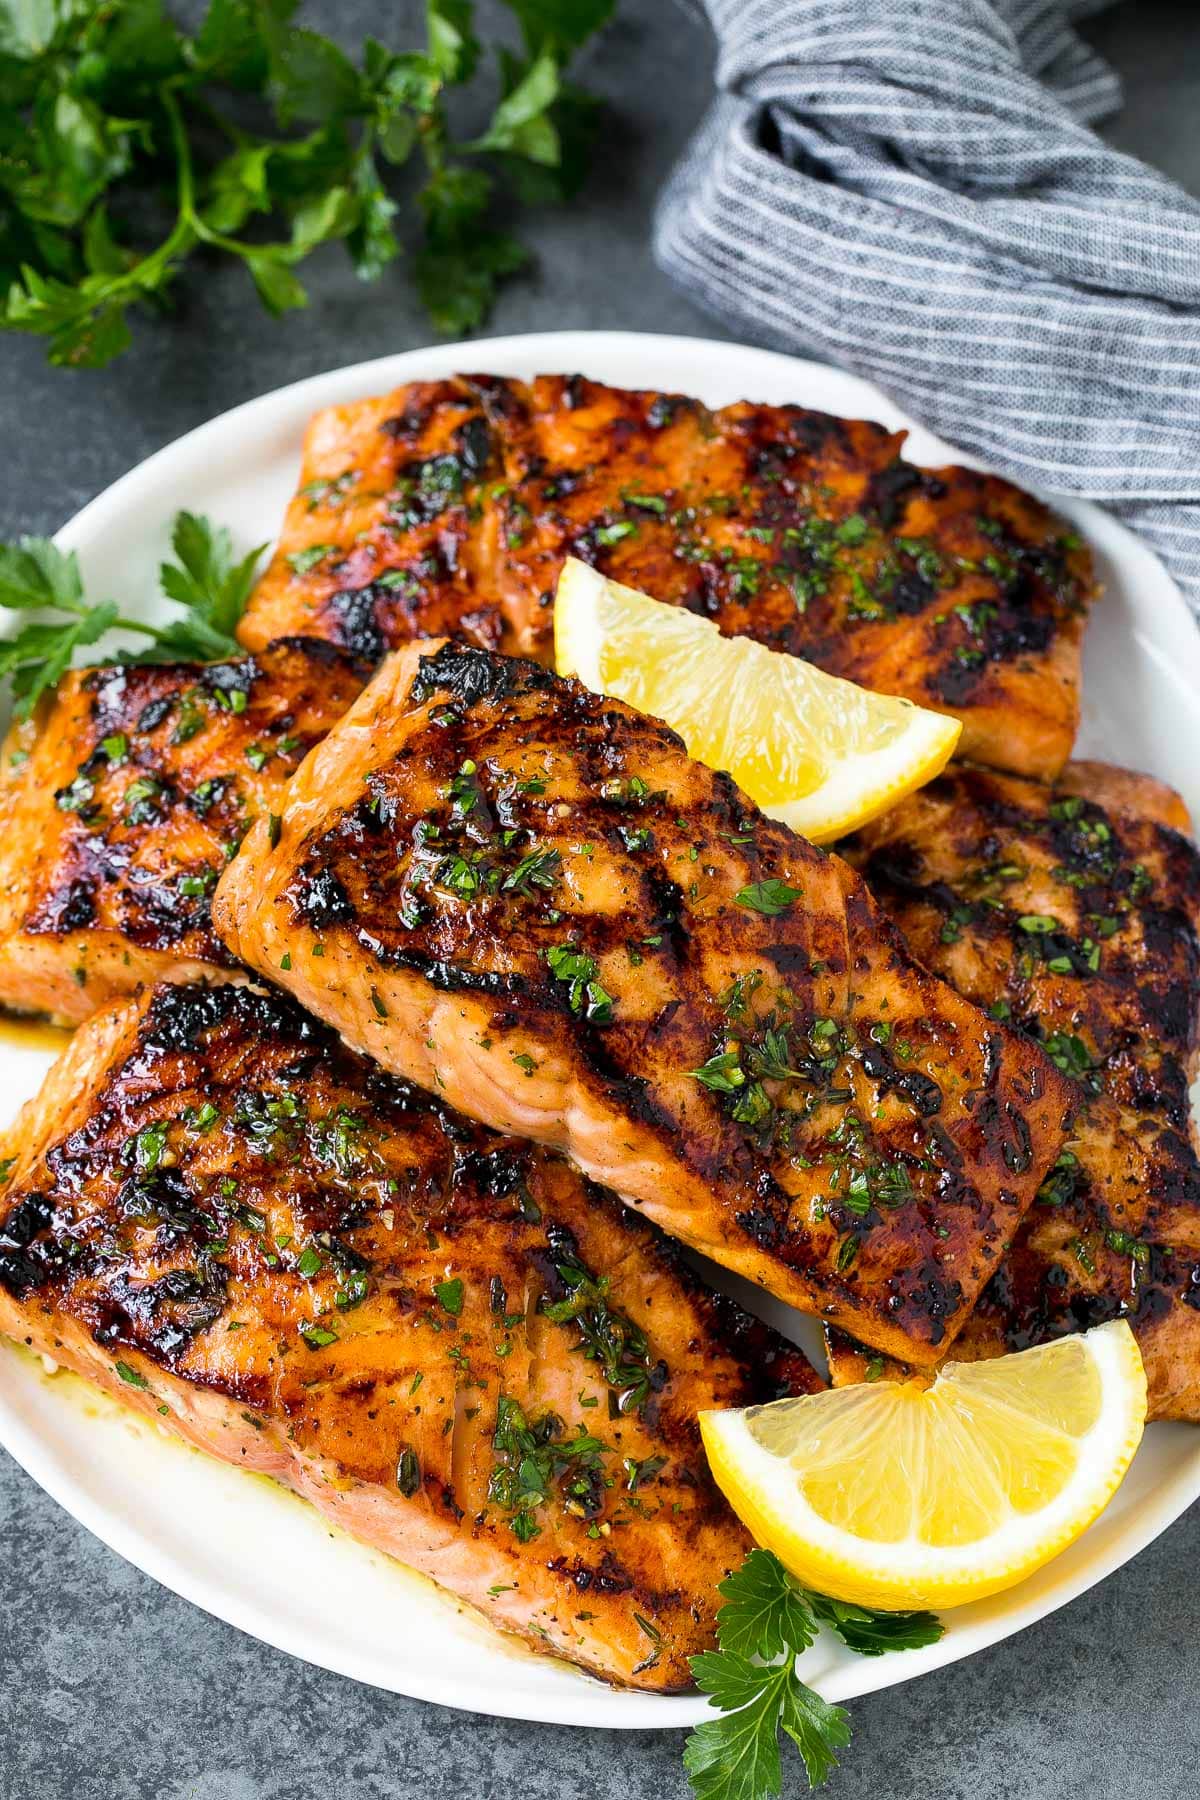 I. Introduction to Grilled Salmon